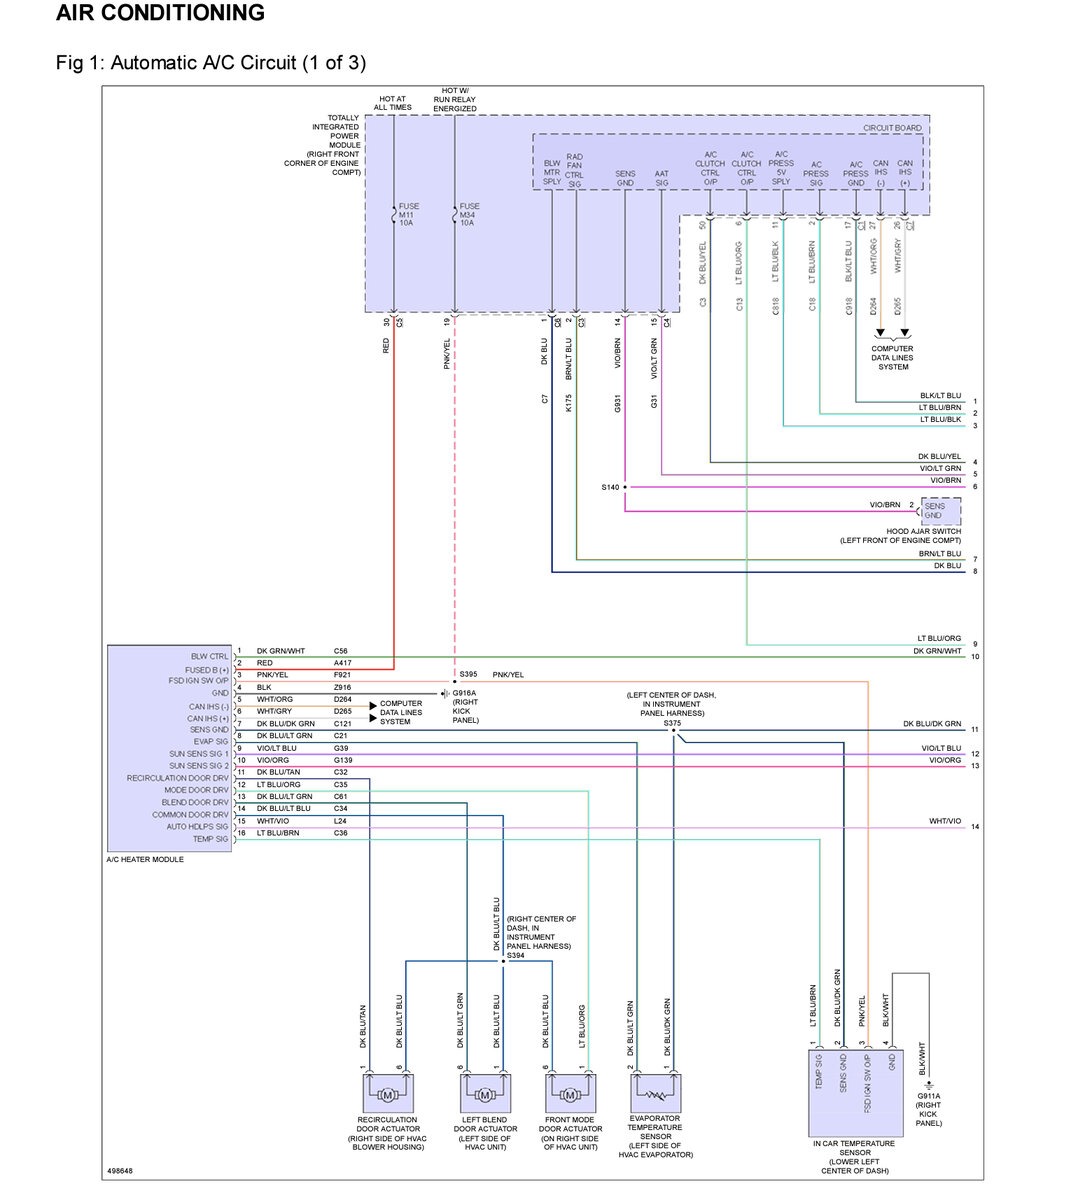 Does any one have a wiring diagram for a 2013 Jeep Wrangler Unlimited? | Jeep  Wrangler JK Forum  Jeep Jk Wiring Diagram    Jeep Wrangler JK Forum